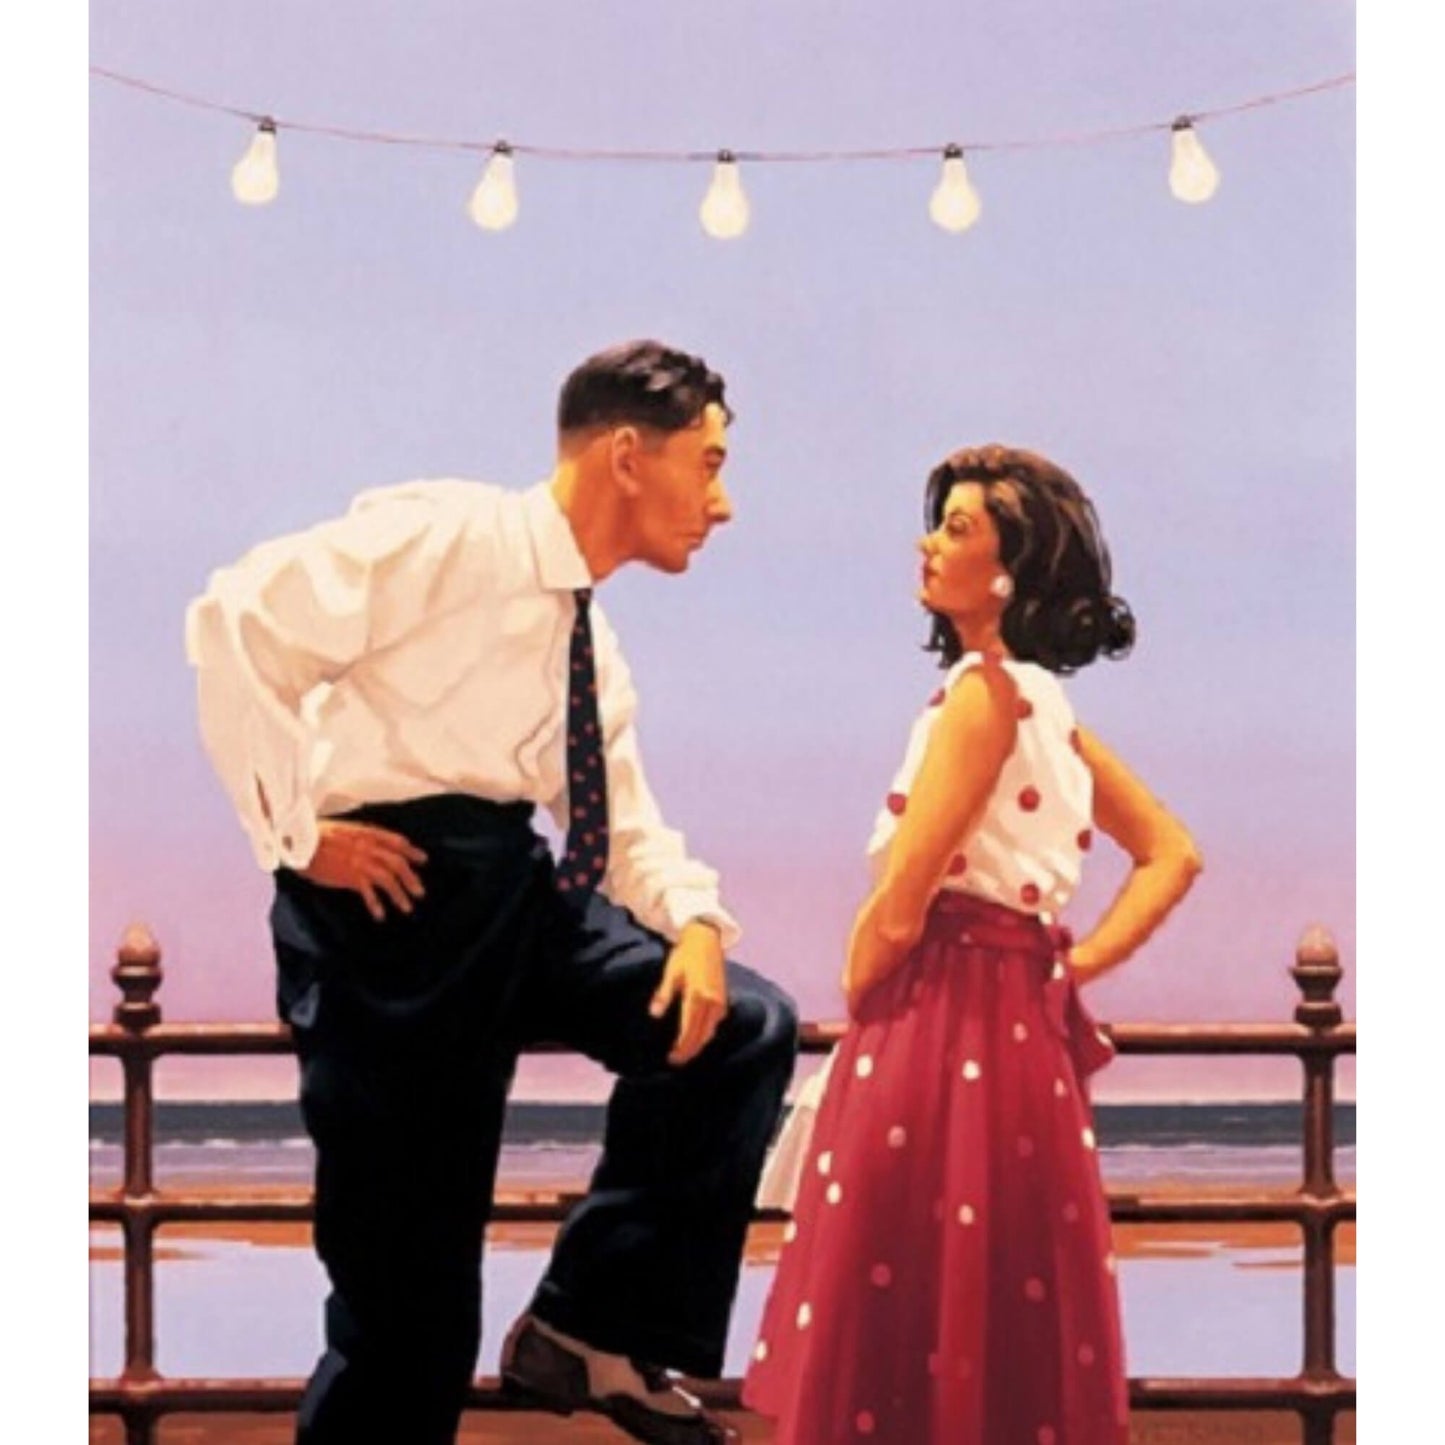 Load image into Gallery viewer, The Big Tease Limited Edition Print Jack Vettriano
